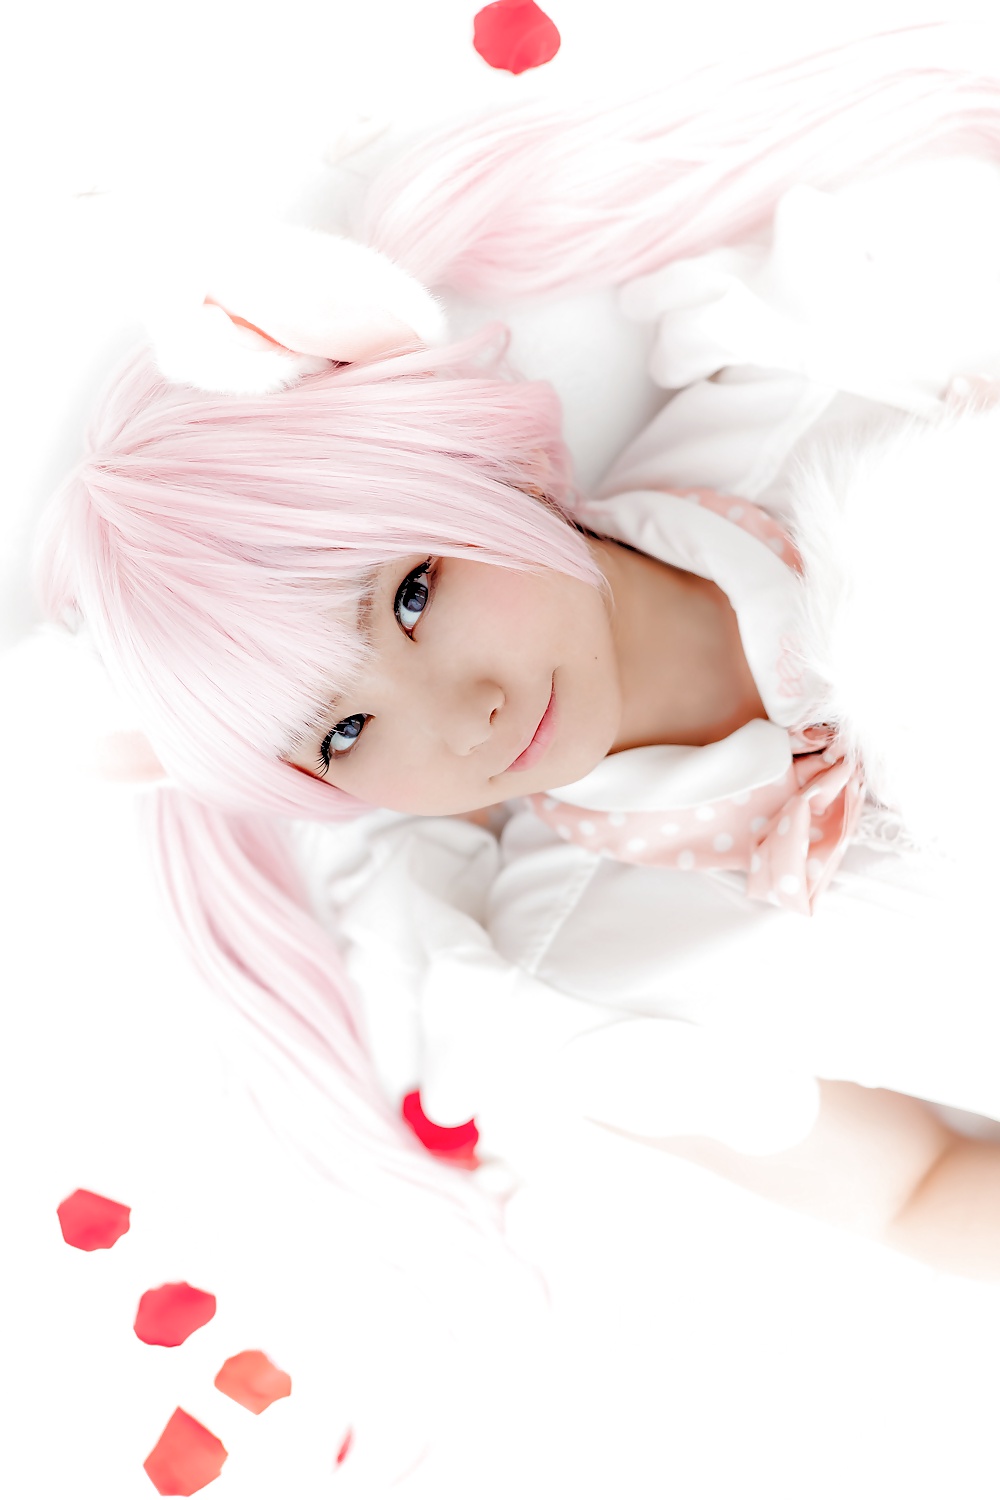 Asiatica cosplay in bianco
 #26558805